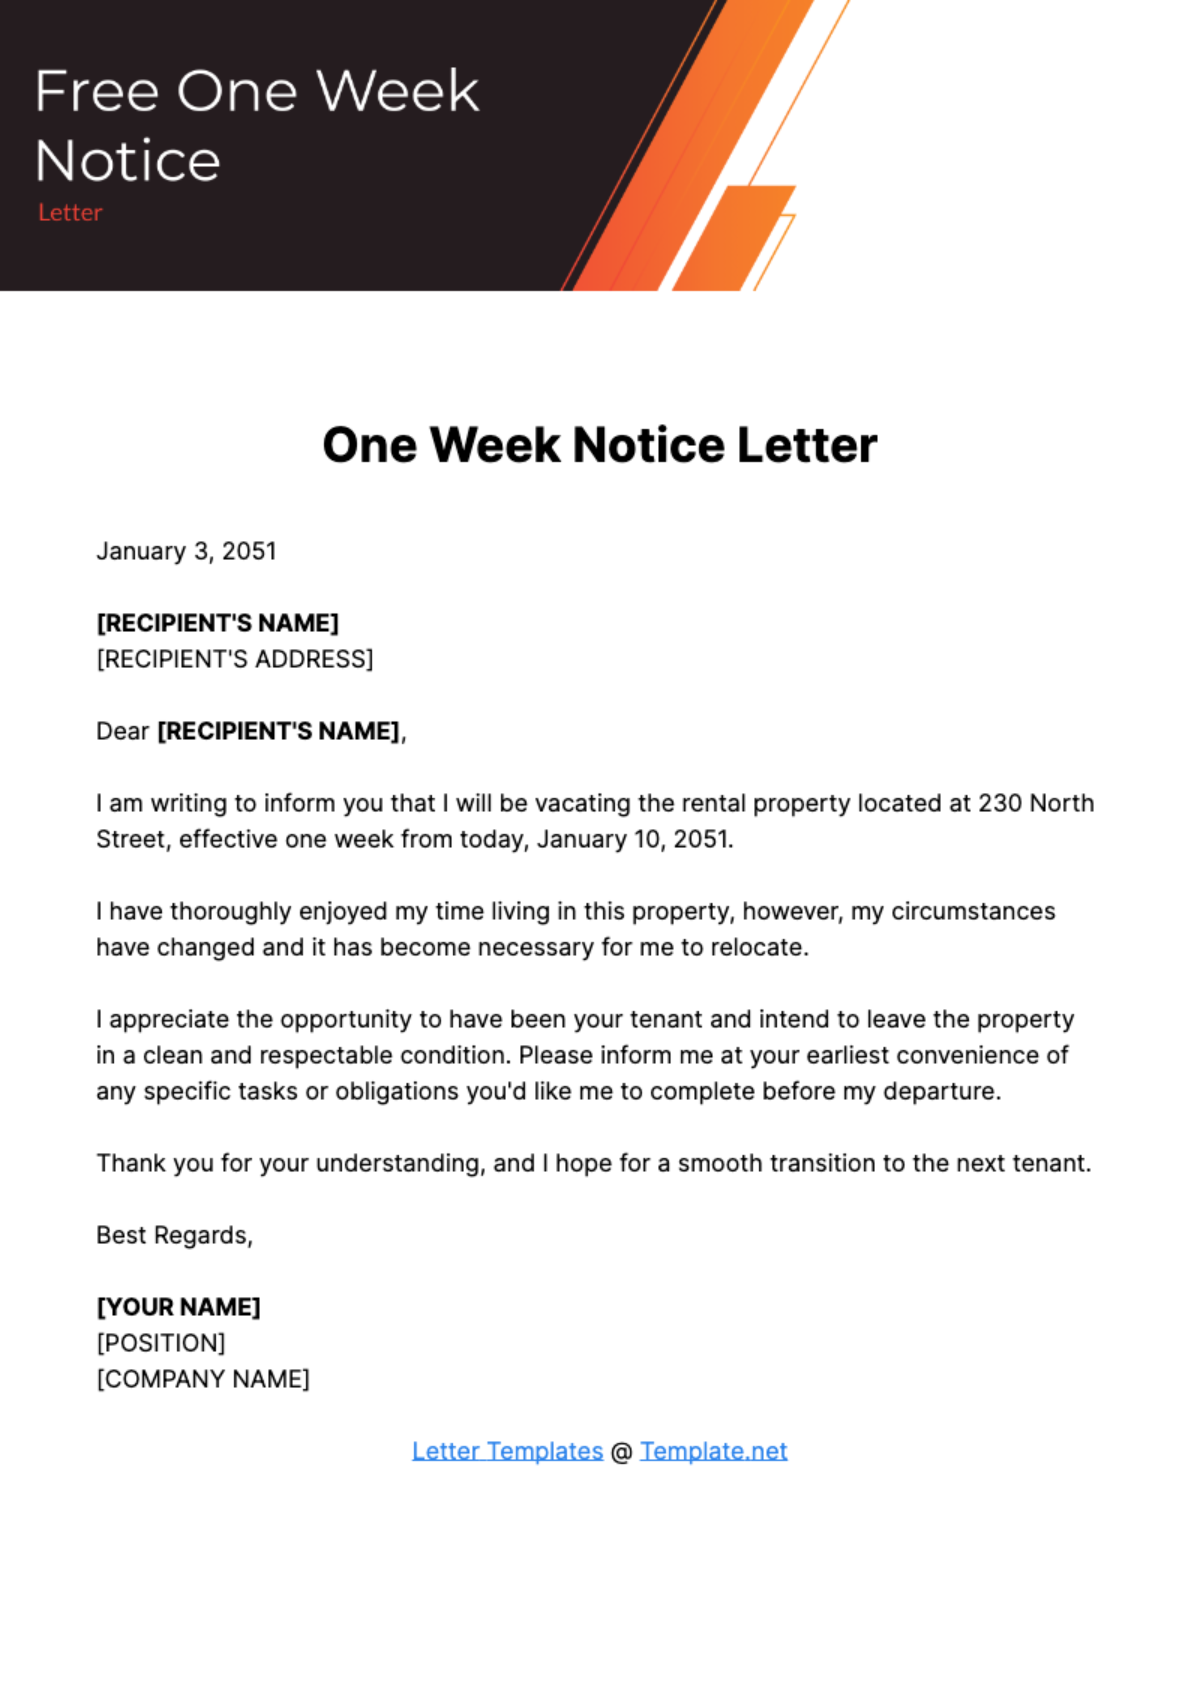 Free One Week Notice Letter Template